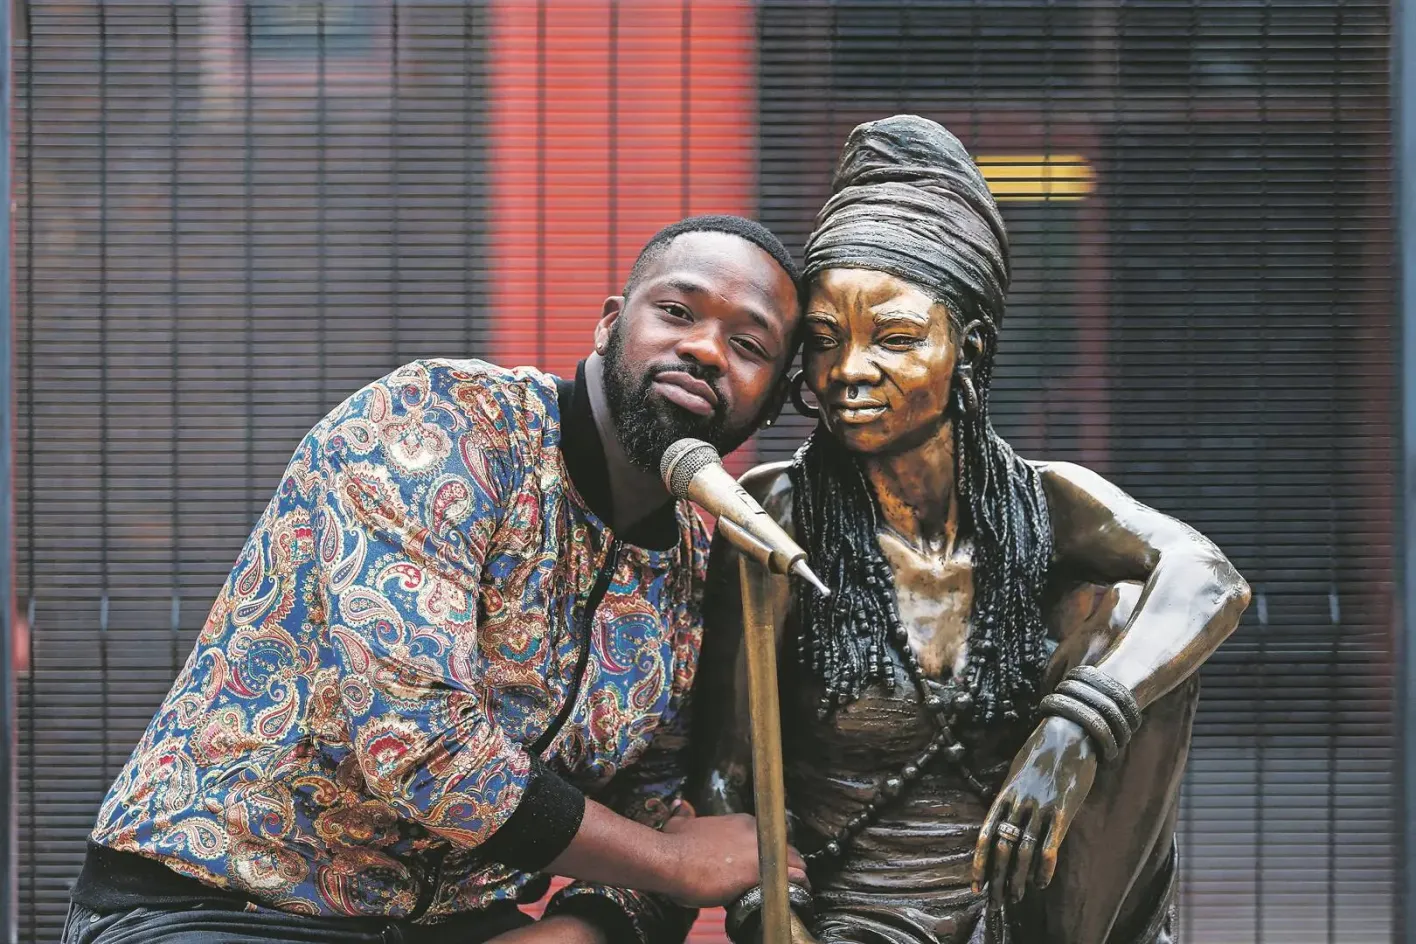 Bongani Fassie has landed himself in serious trouble